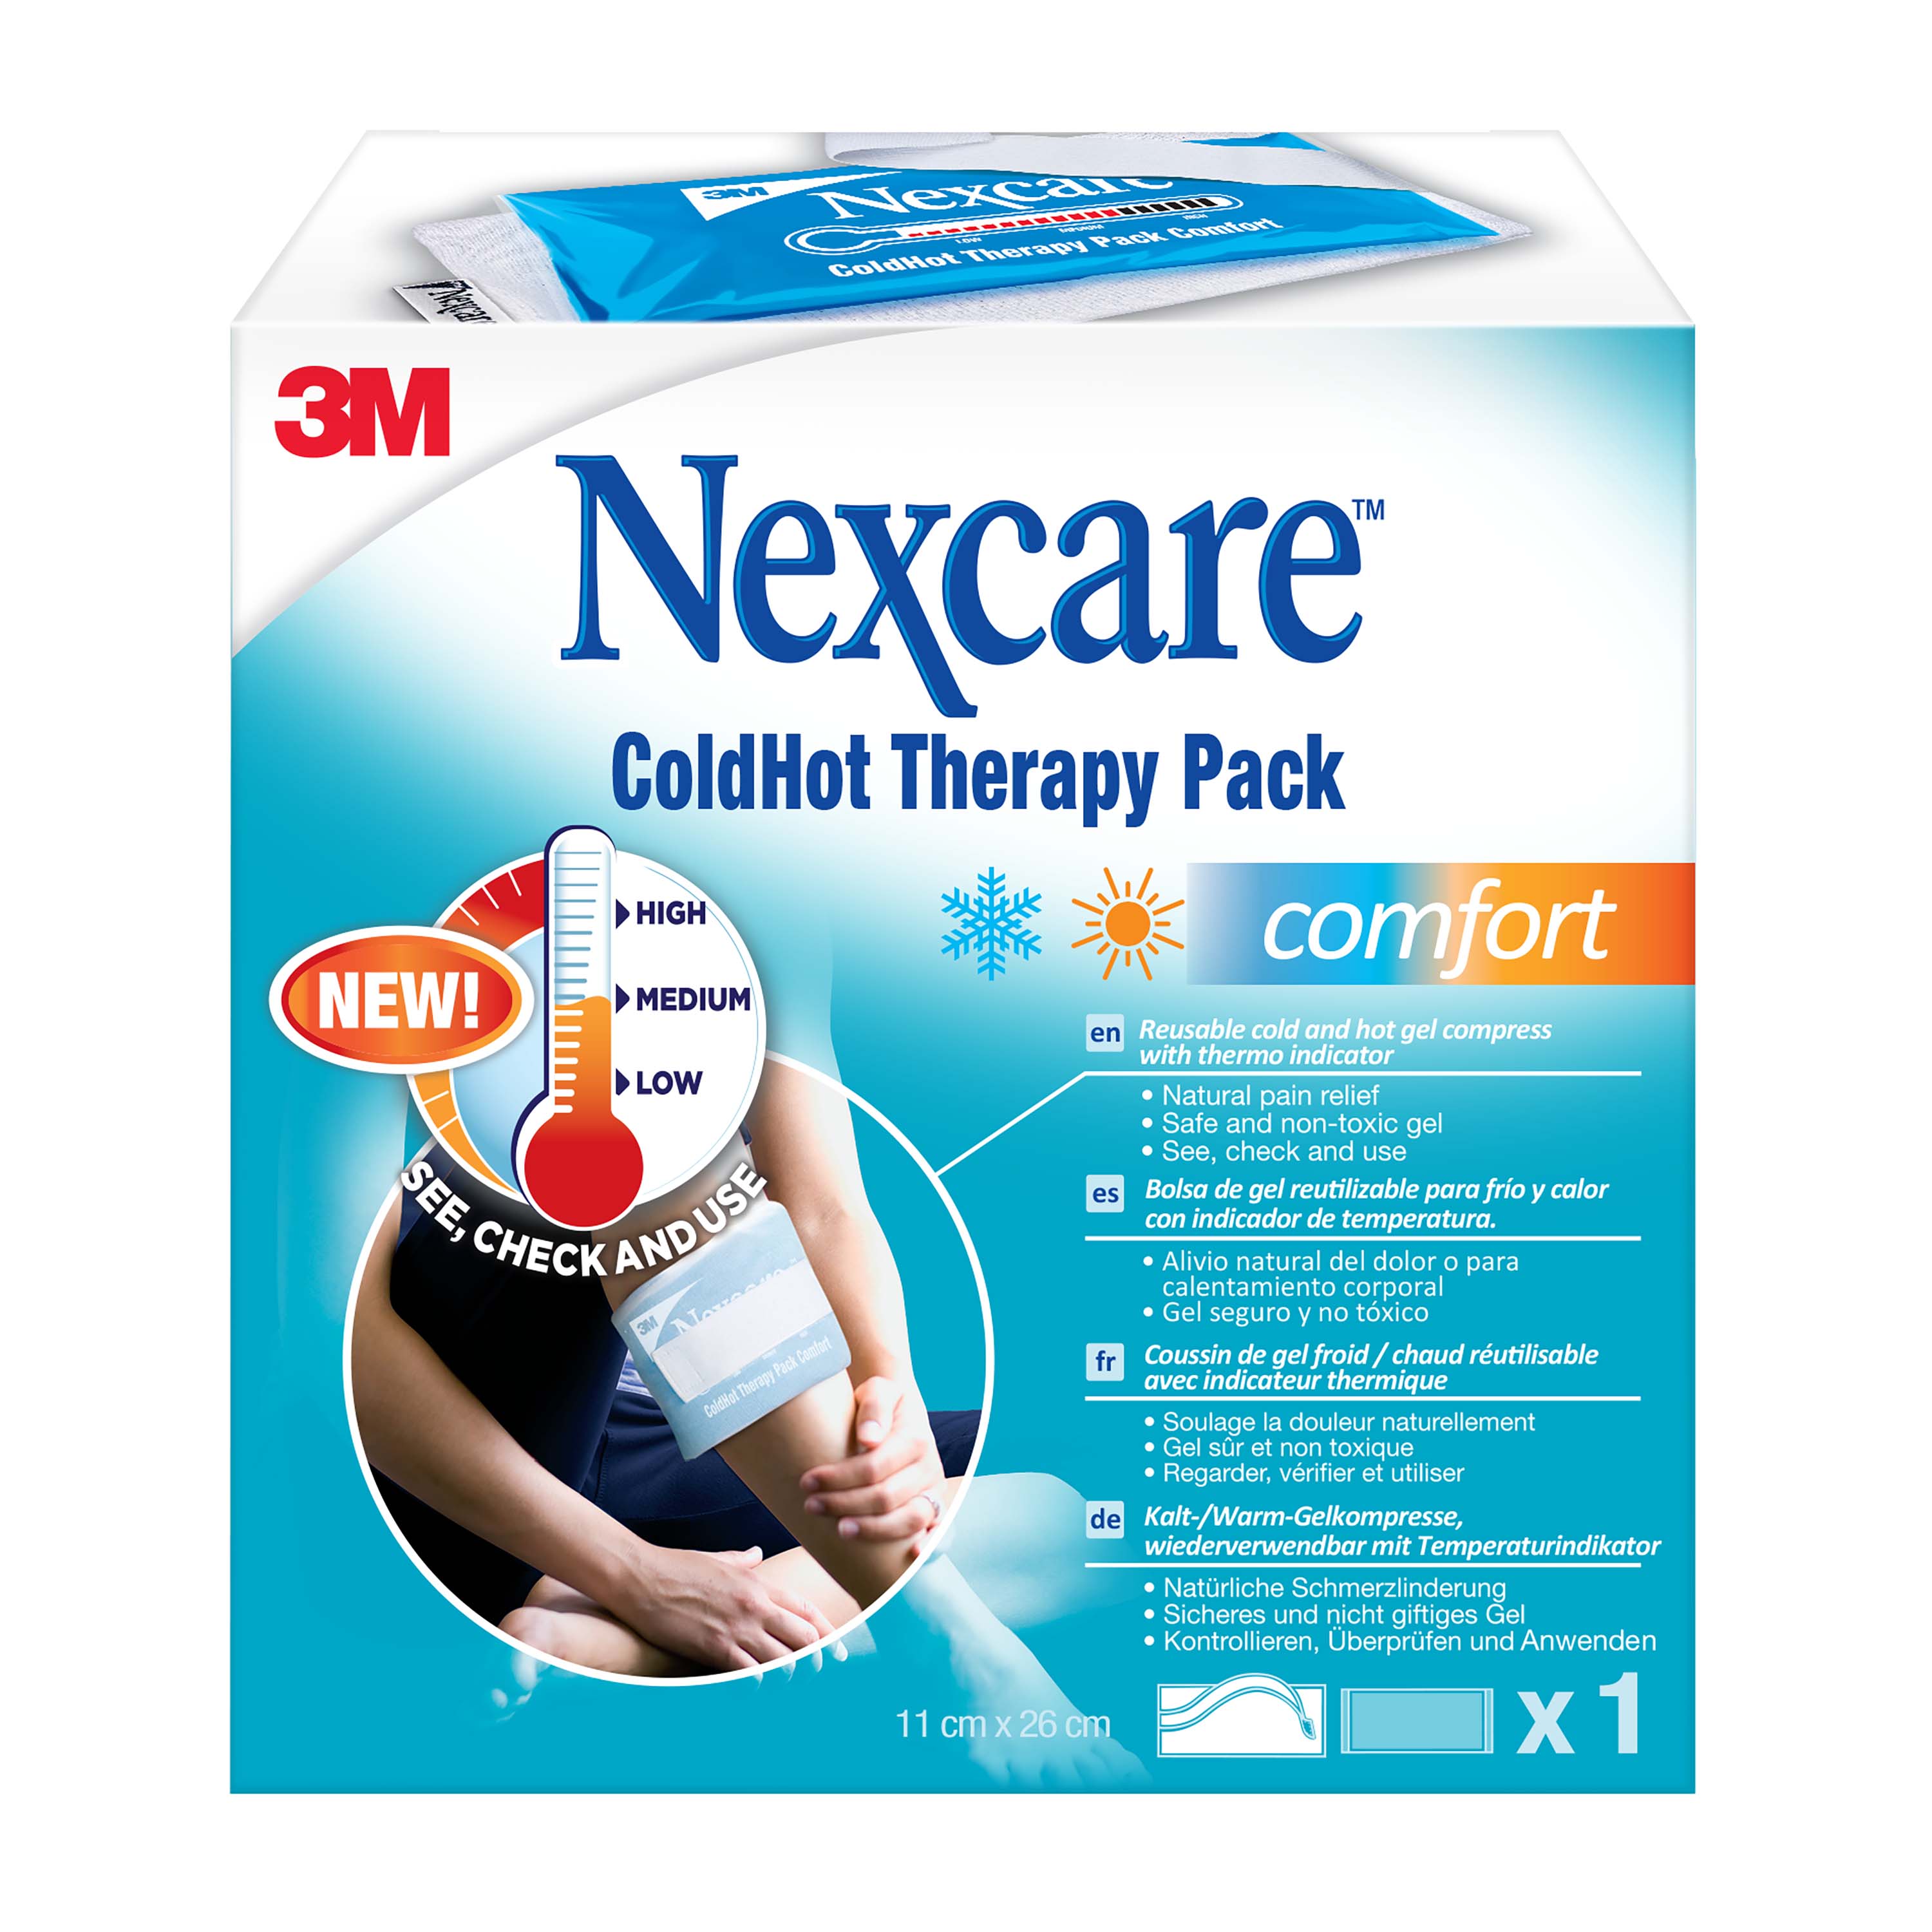 ColdHot Therapy Pack Comfort Thermoindicator